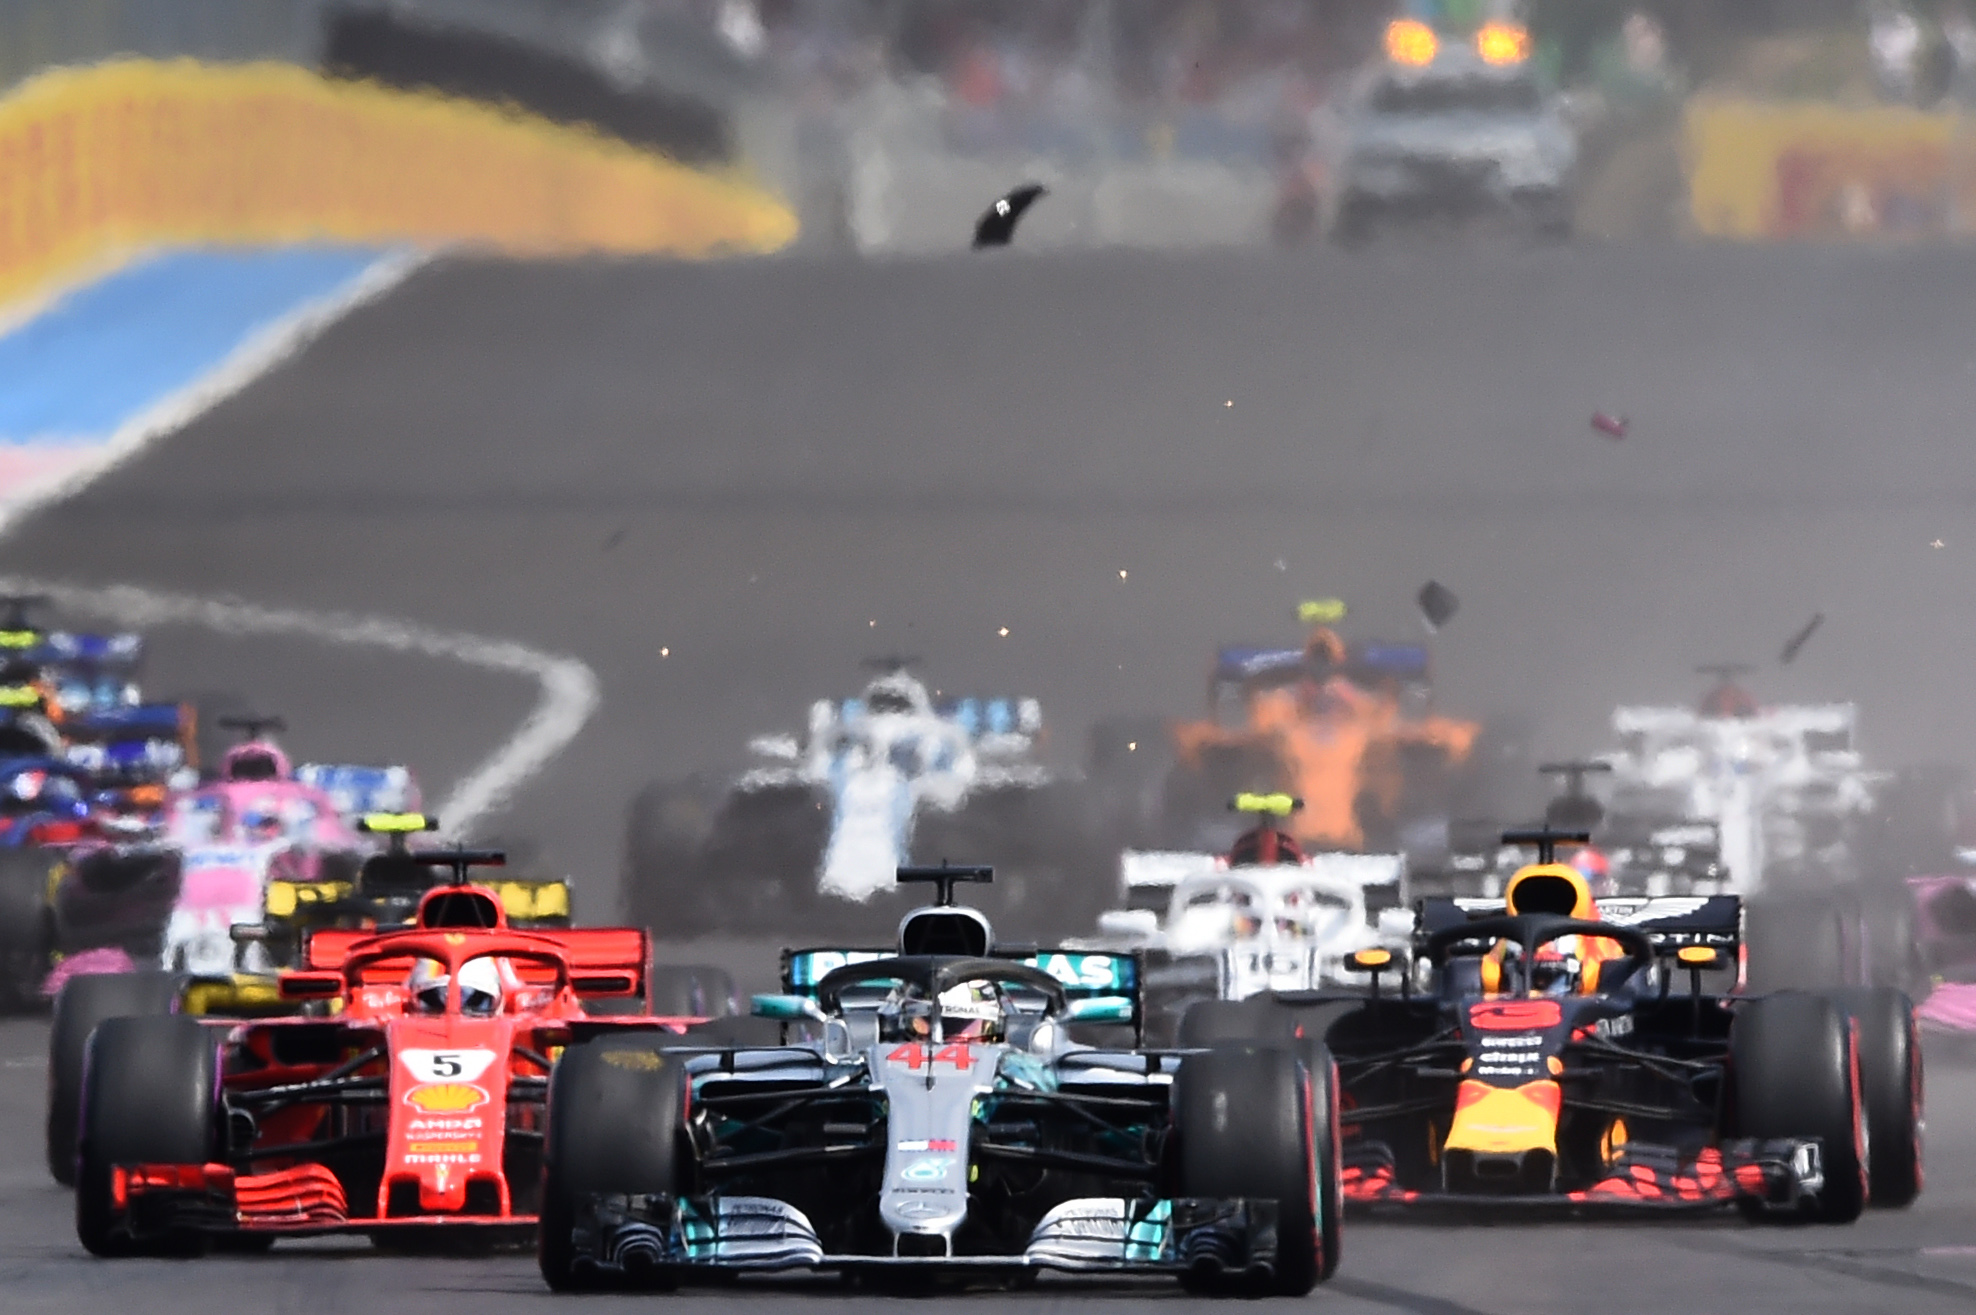 Car parts fly as drivers crash at the start of the French Grand Prix Pic: BORIS HORVAT/AFP/Getty Images